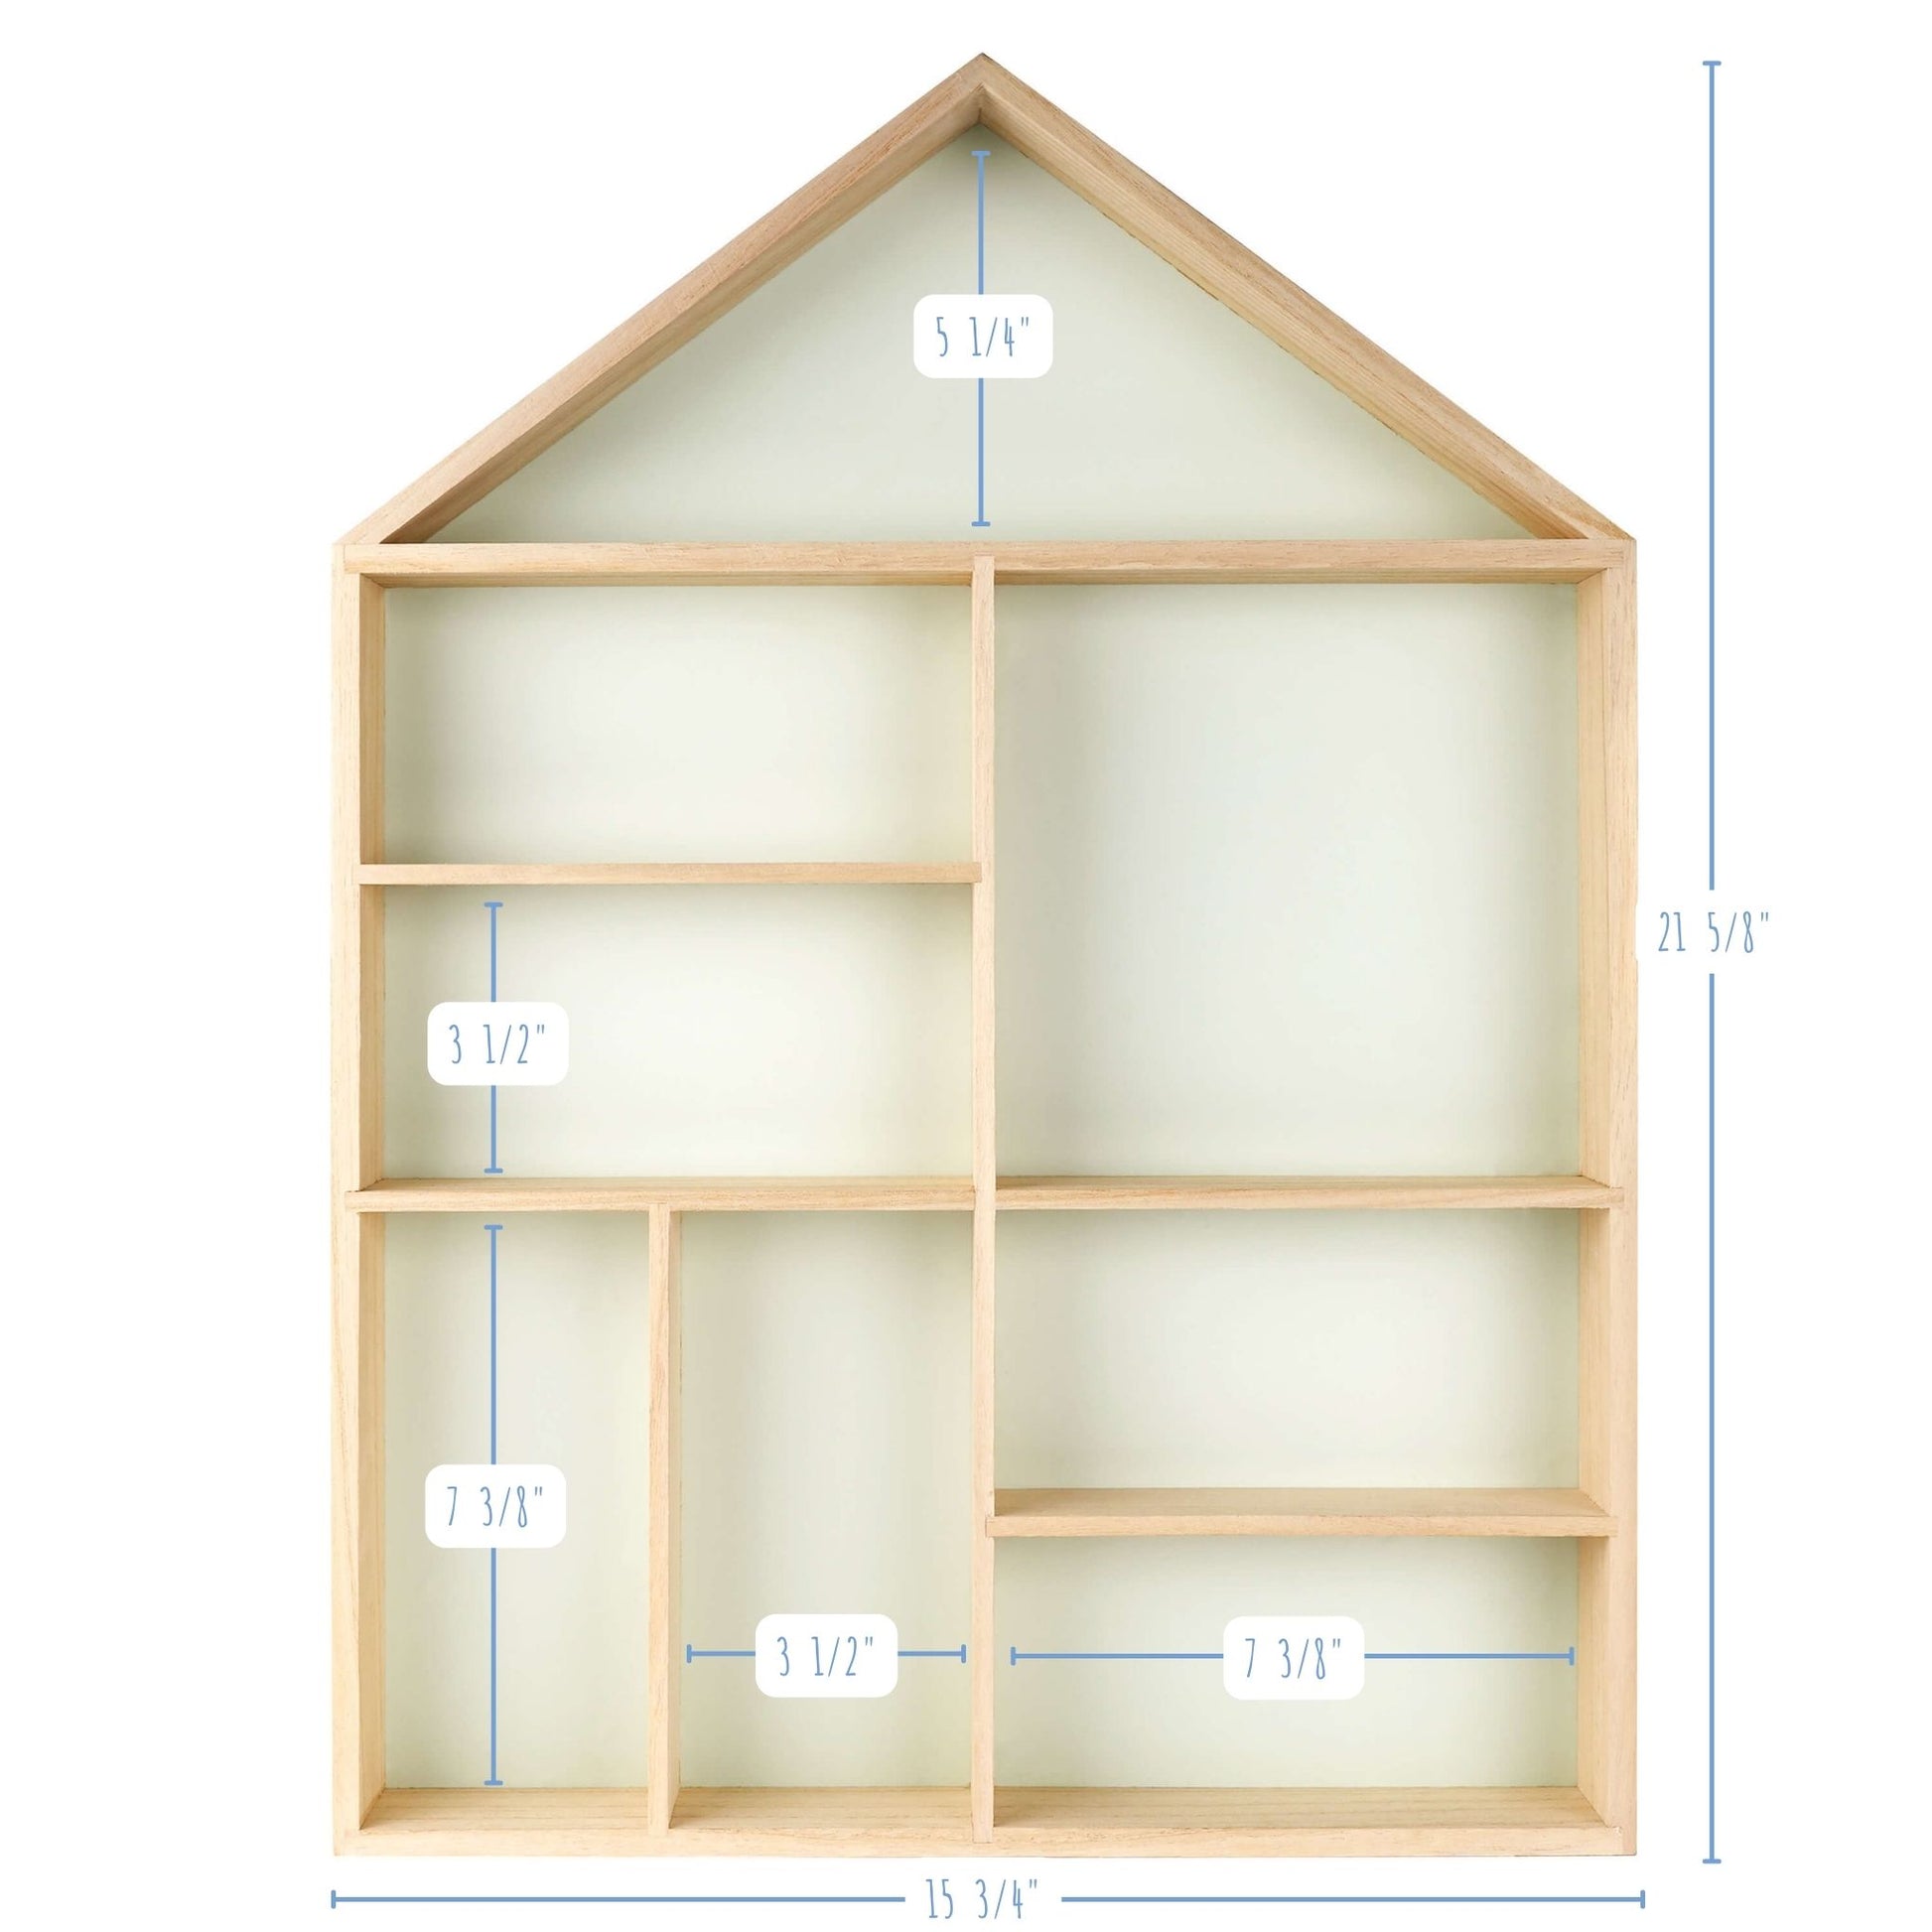 House shaped wooden toy display shelf with a mint-colored backboard - with compartments size detailed (front view)